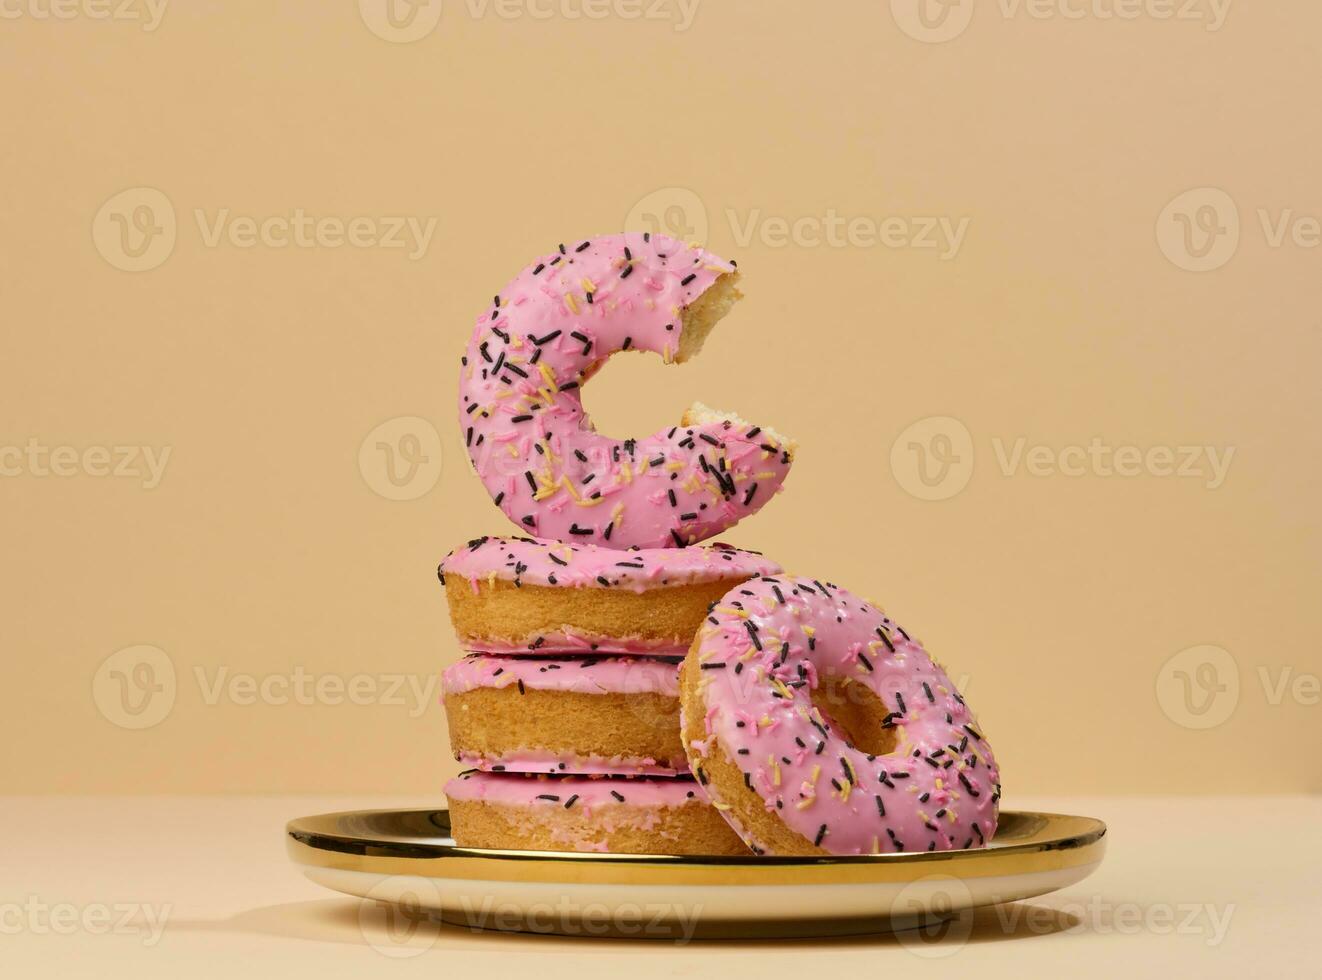 Donut covered with pink glaze and sprinkled with colorful sprinkles on a round plate photo